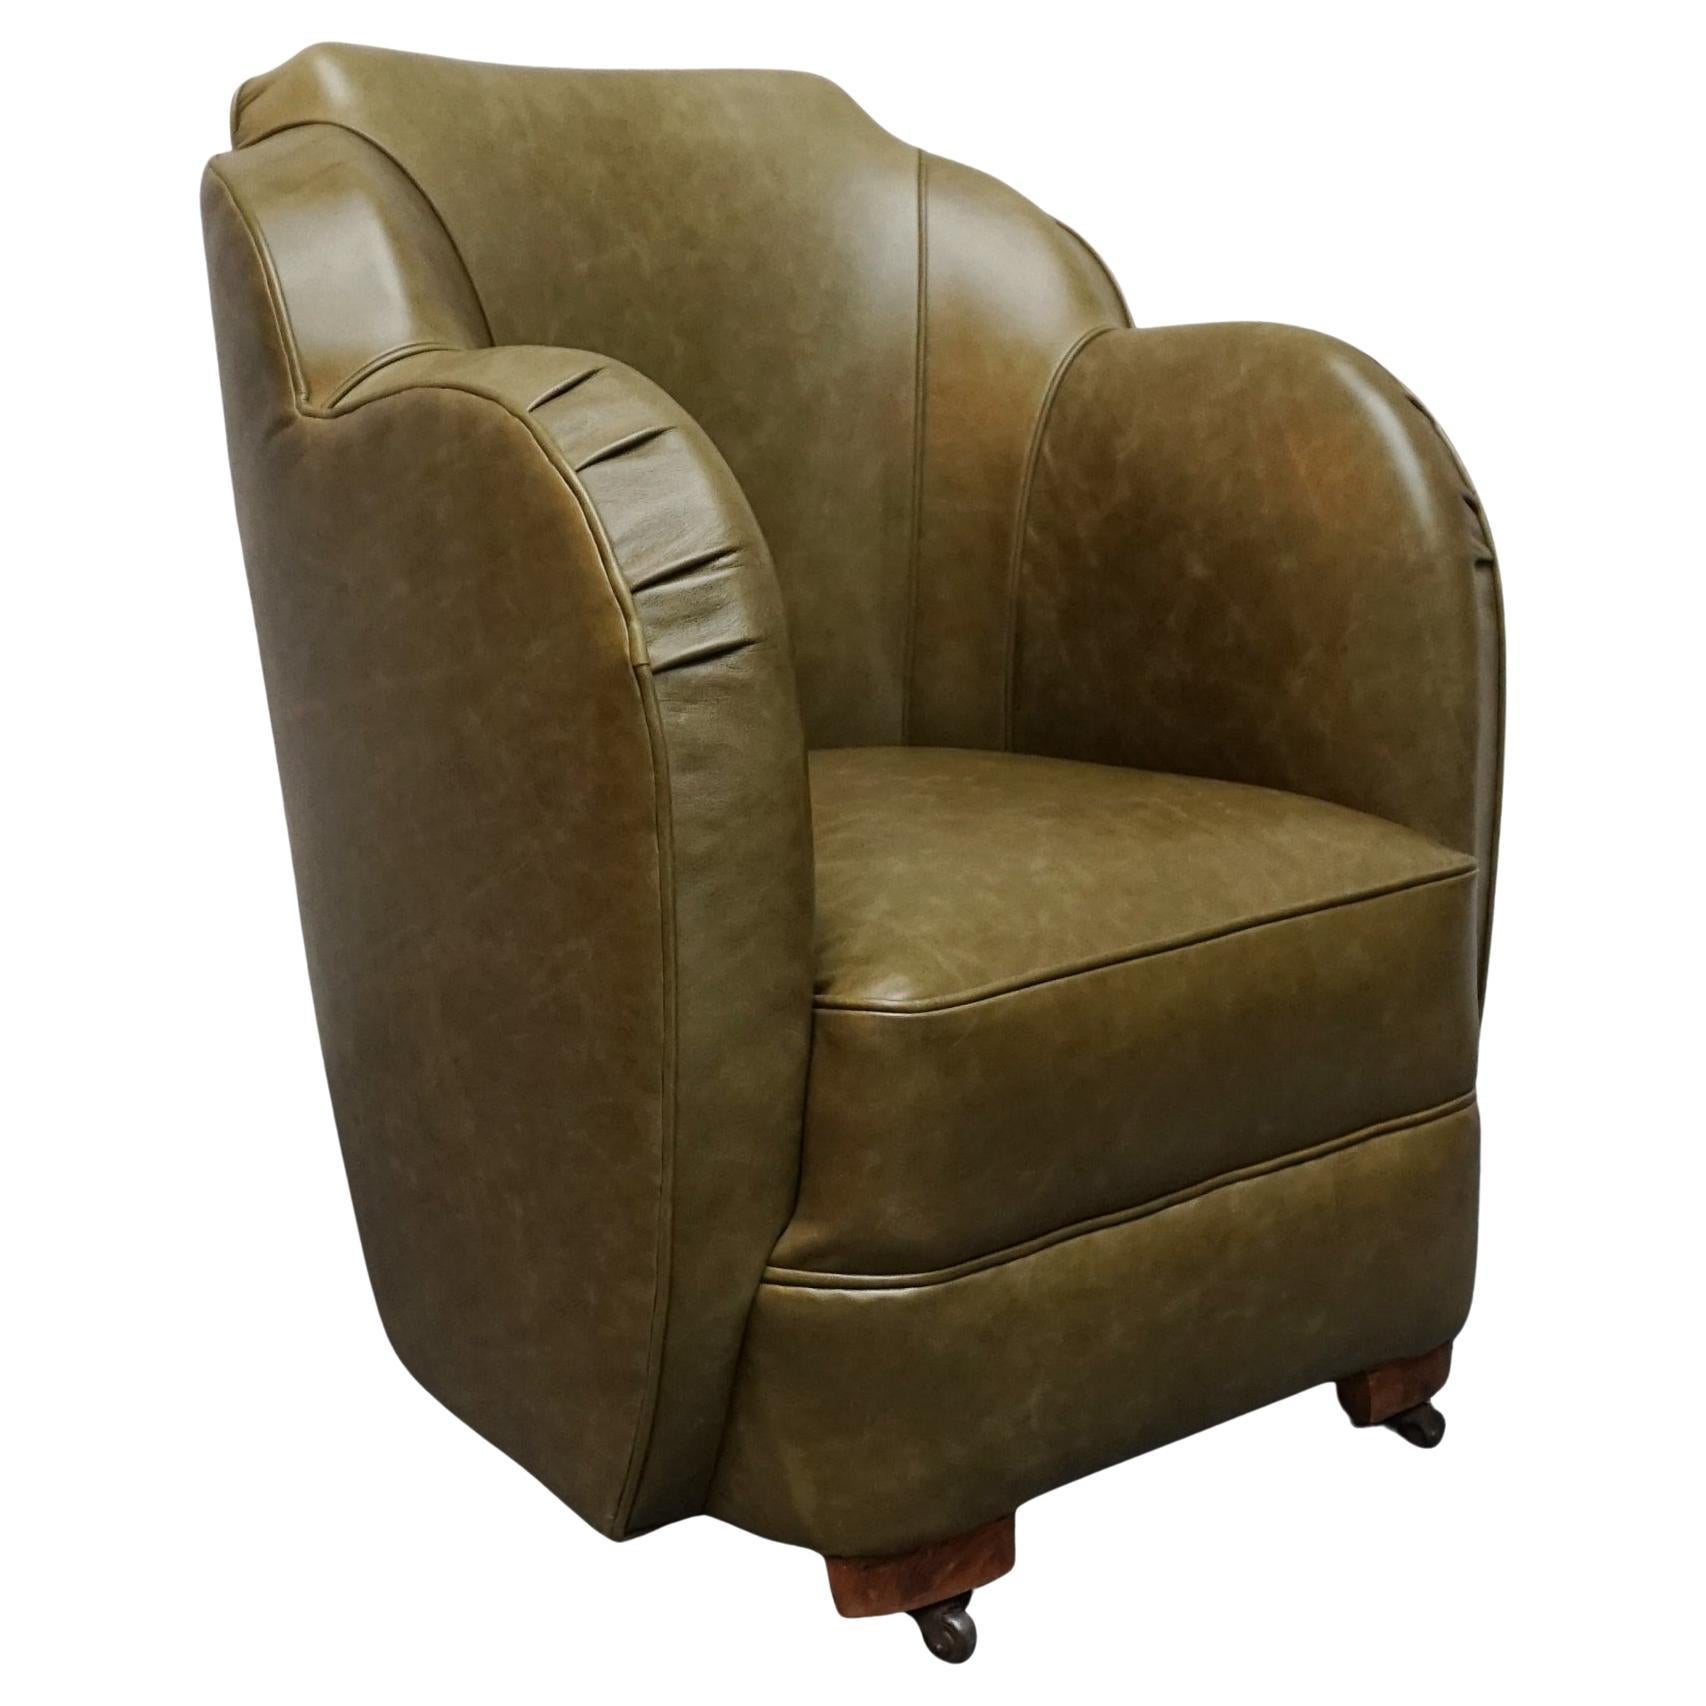 An Art Deco Olive Green Leather Cloud Chair For Sale